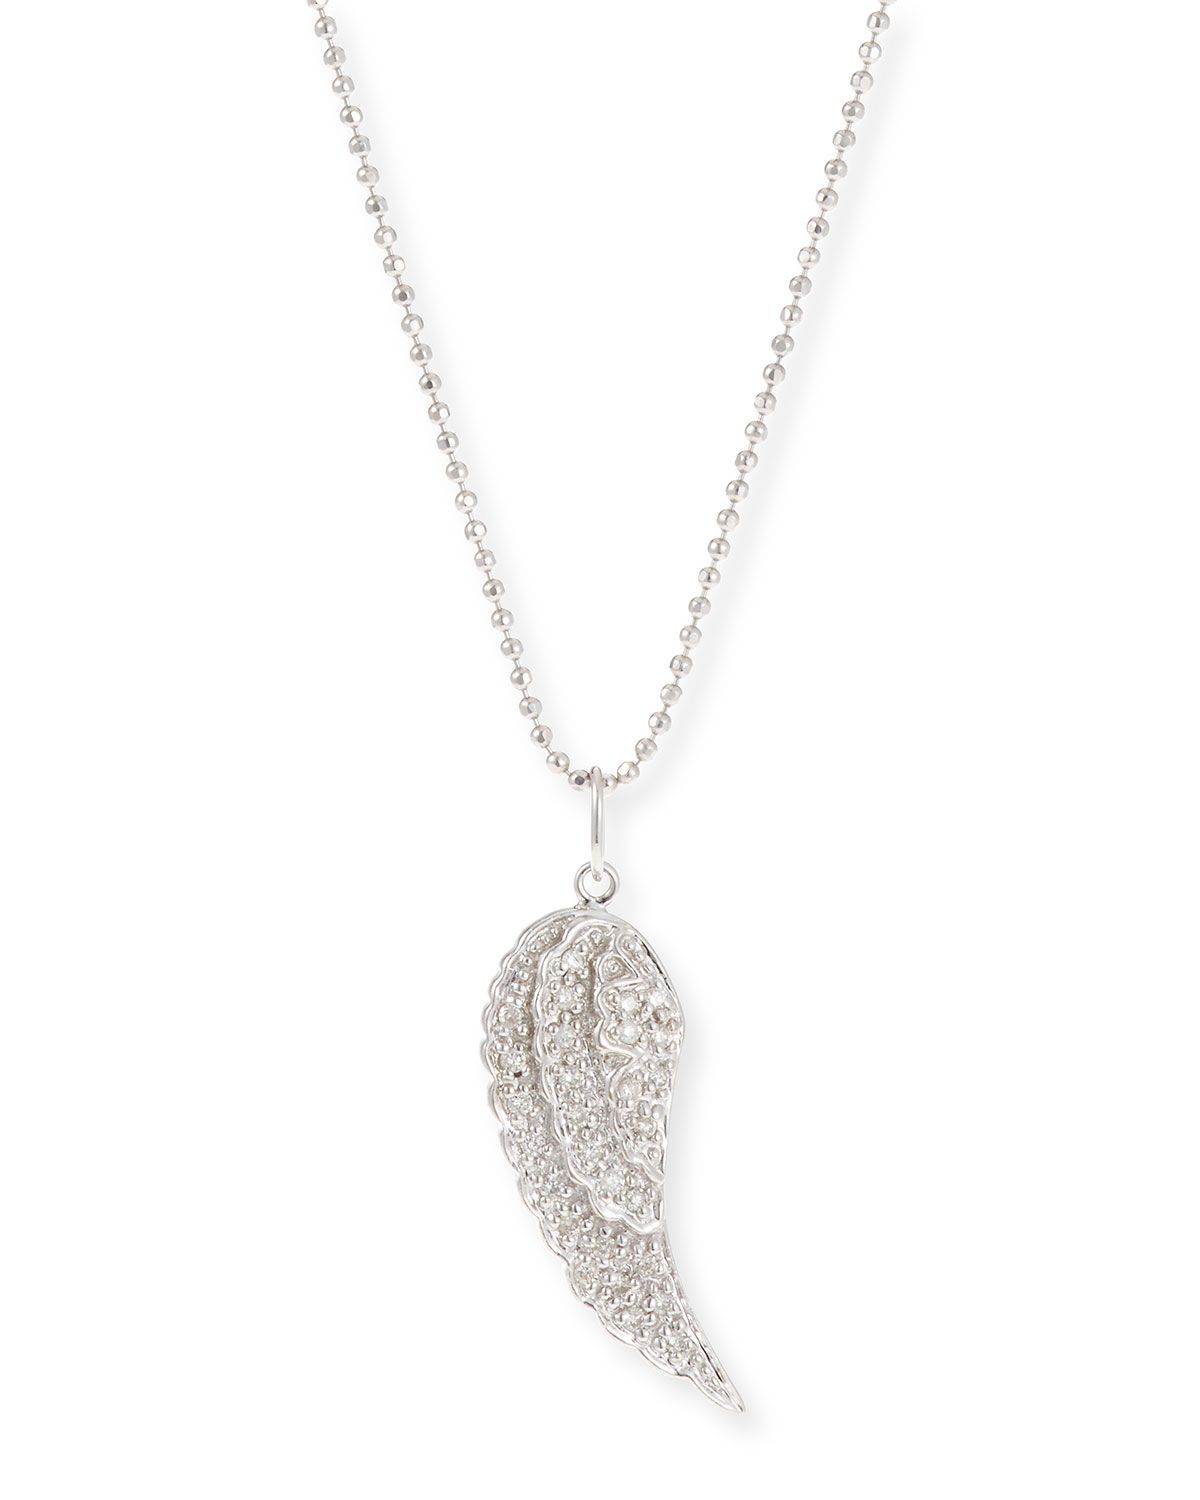 14k Small Angel Wing Pendant Necklace W/ Diamonds For Most Popular Angel Wing Pendant Necklaces (View 4 of 25)